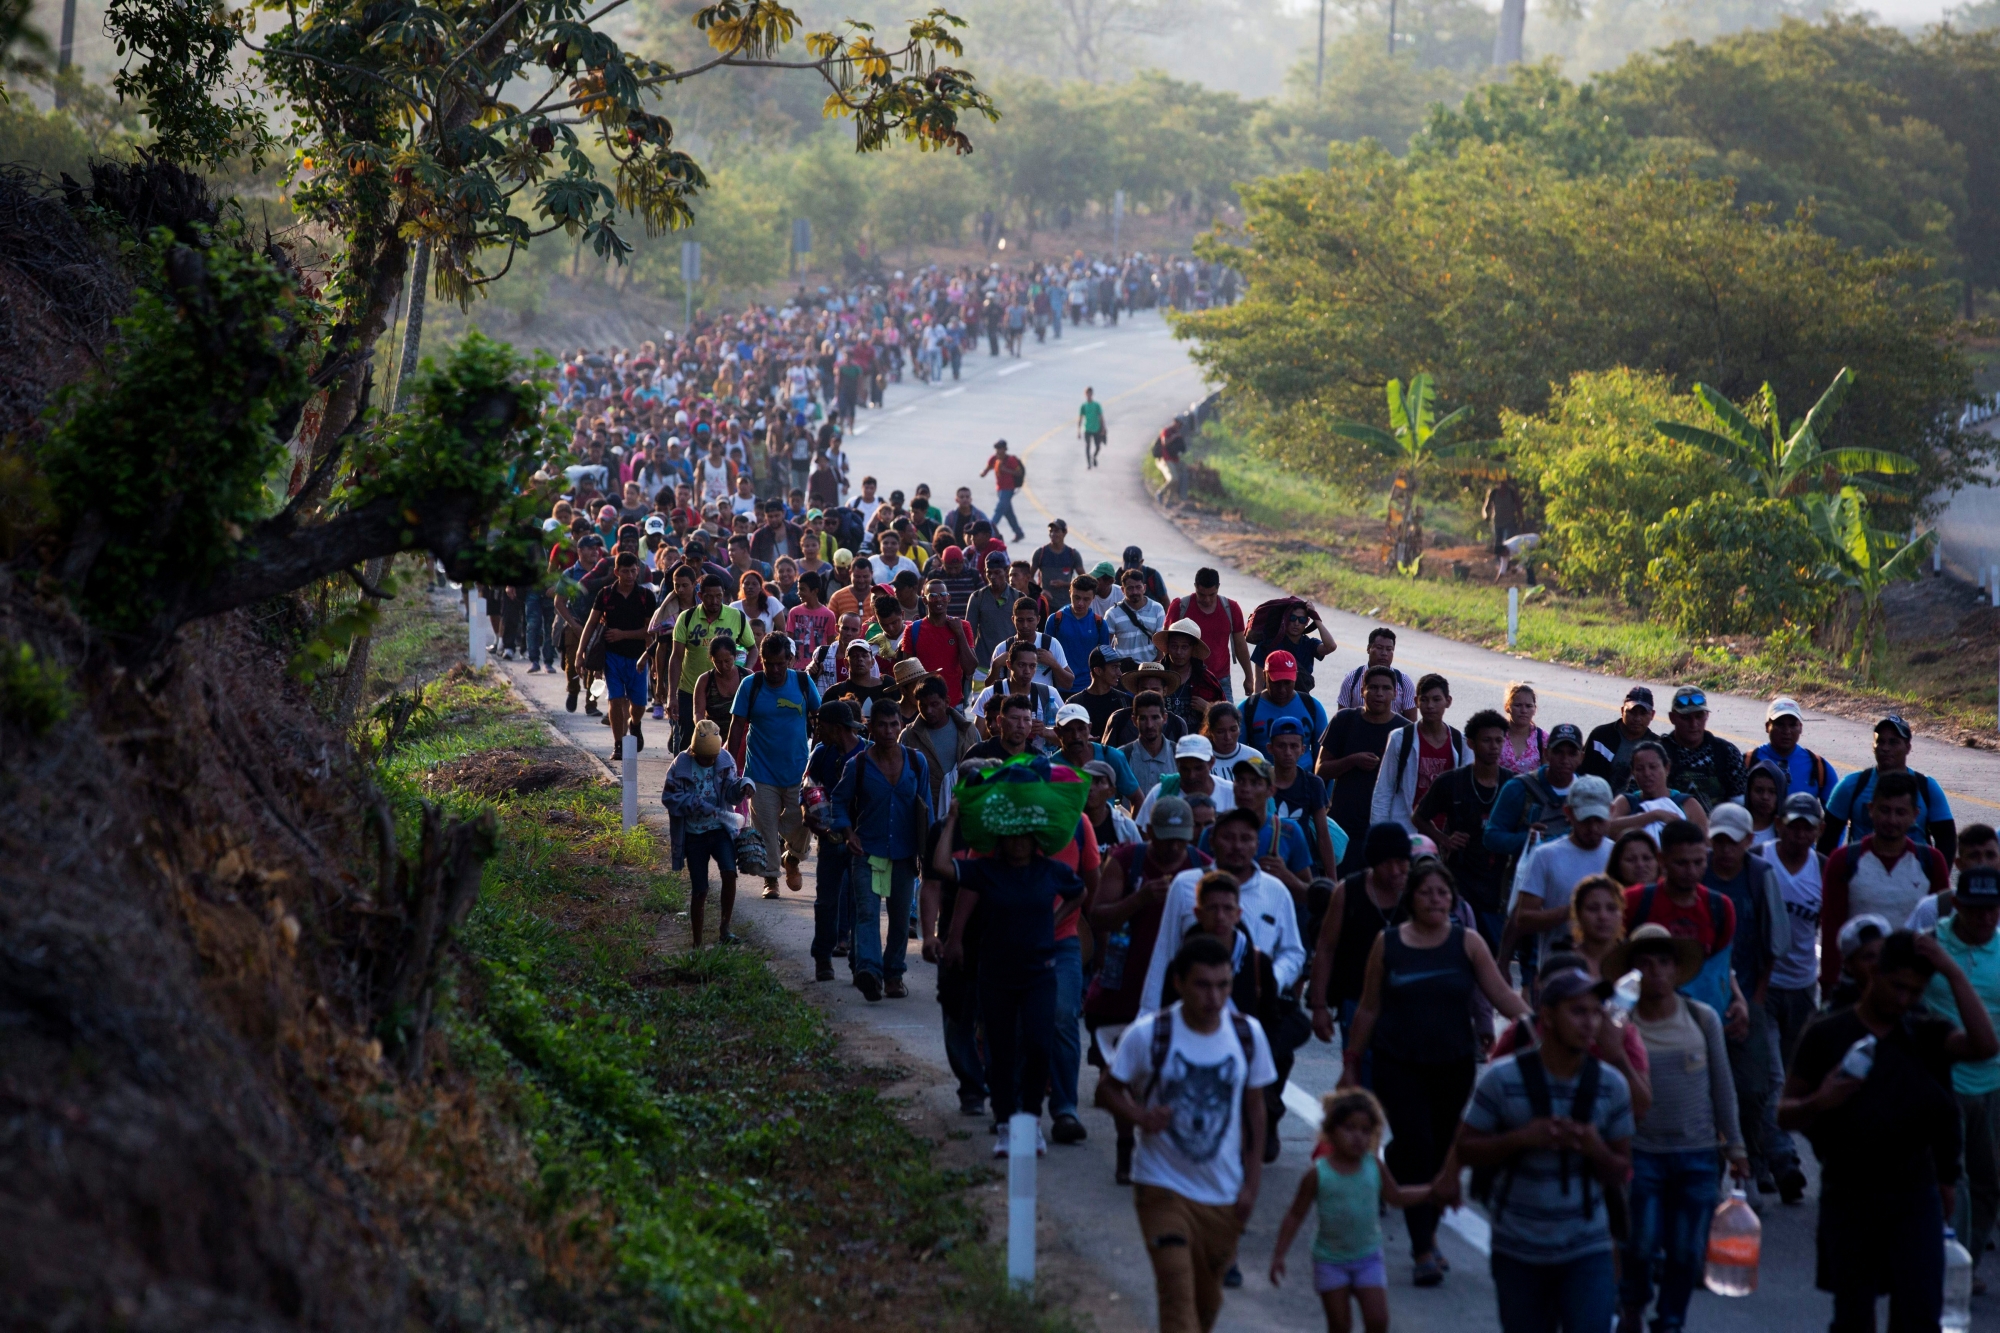 FILE - In this April 20, 2019, file photo, Central American migrants, part of a caravan hoping to reach the U.S. border, move on the road in Escuintla, Chiapas state, Mexico. The number of migrants apprehended at the Southern border topped 100,000 for the second month in a row, as the Trump administration manages an ever increasing number of Central American families streaming to the U.S. (AP Photo/Moises Castillo, File) Border Woes